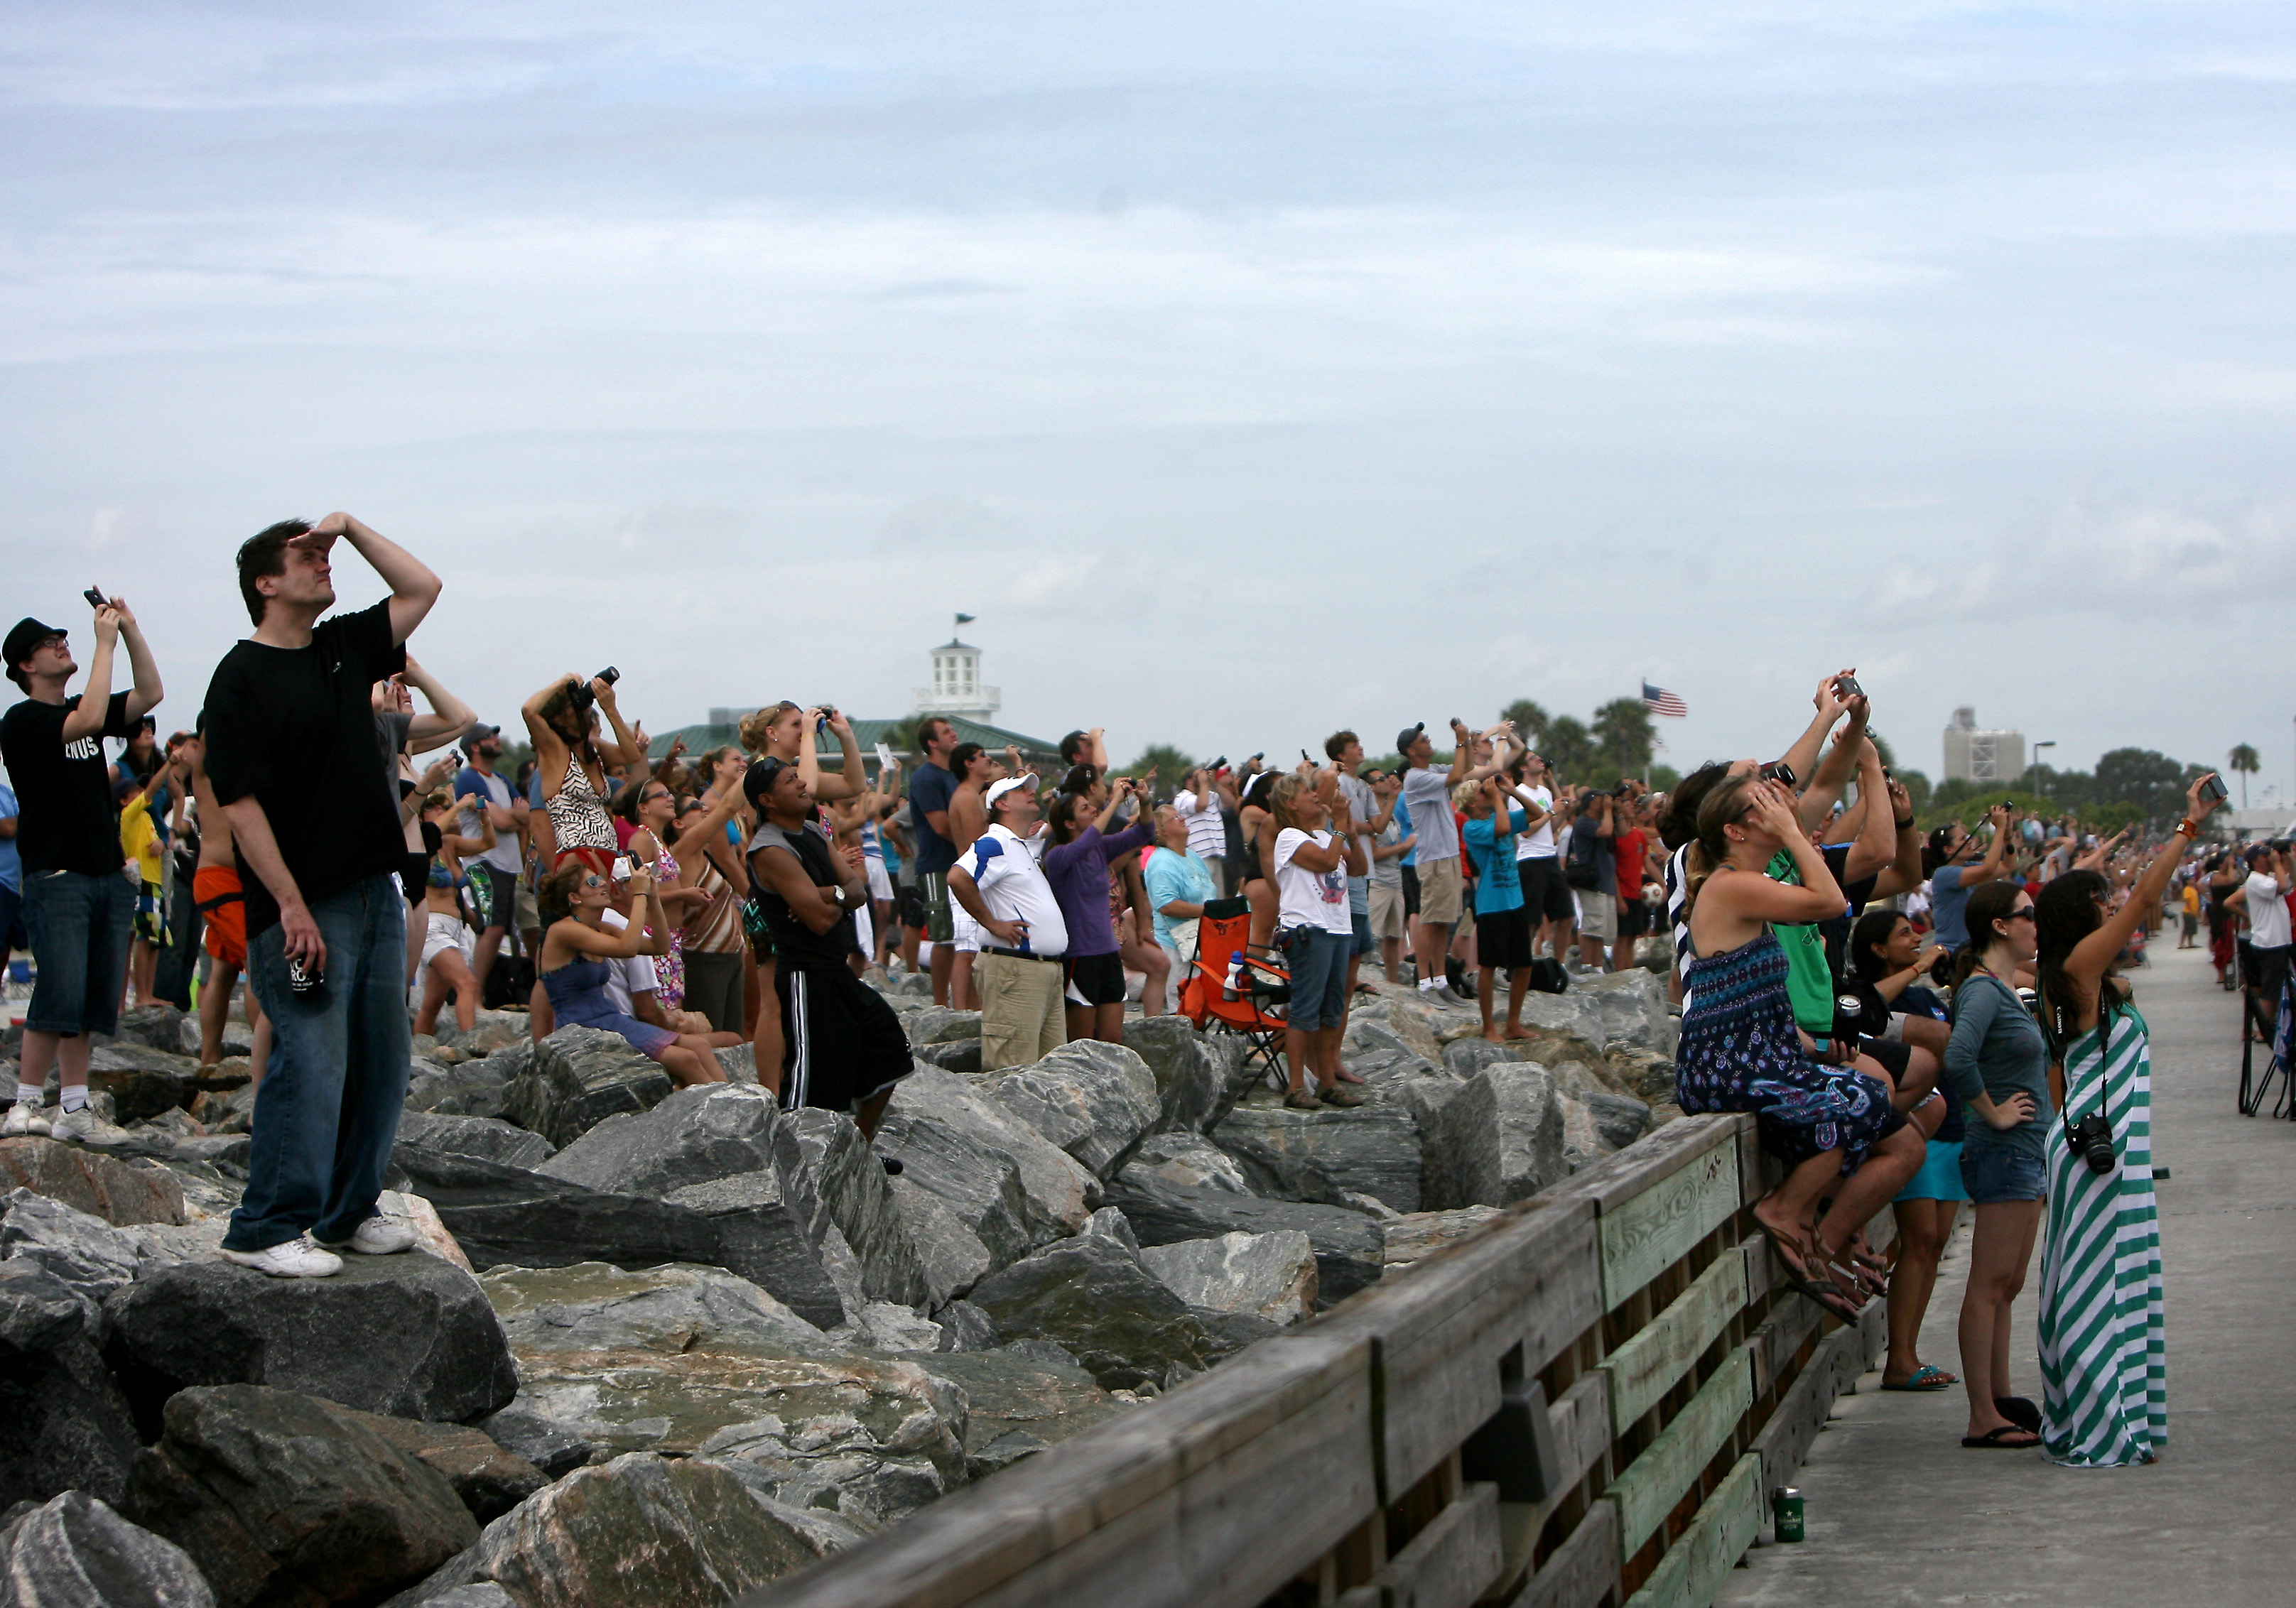 A large crowd of people watch from Jetty Park in Cape Canaveral as the space shuttle Atlantis launches, Friday, July 8, 2011.